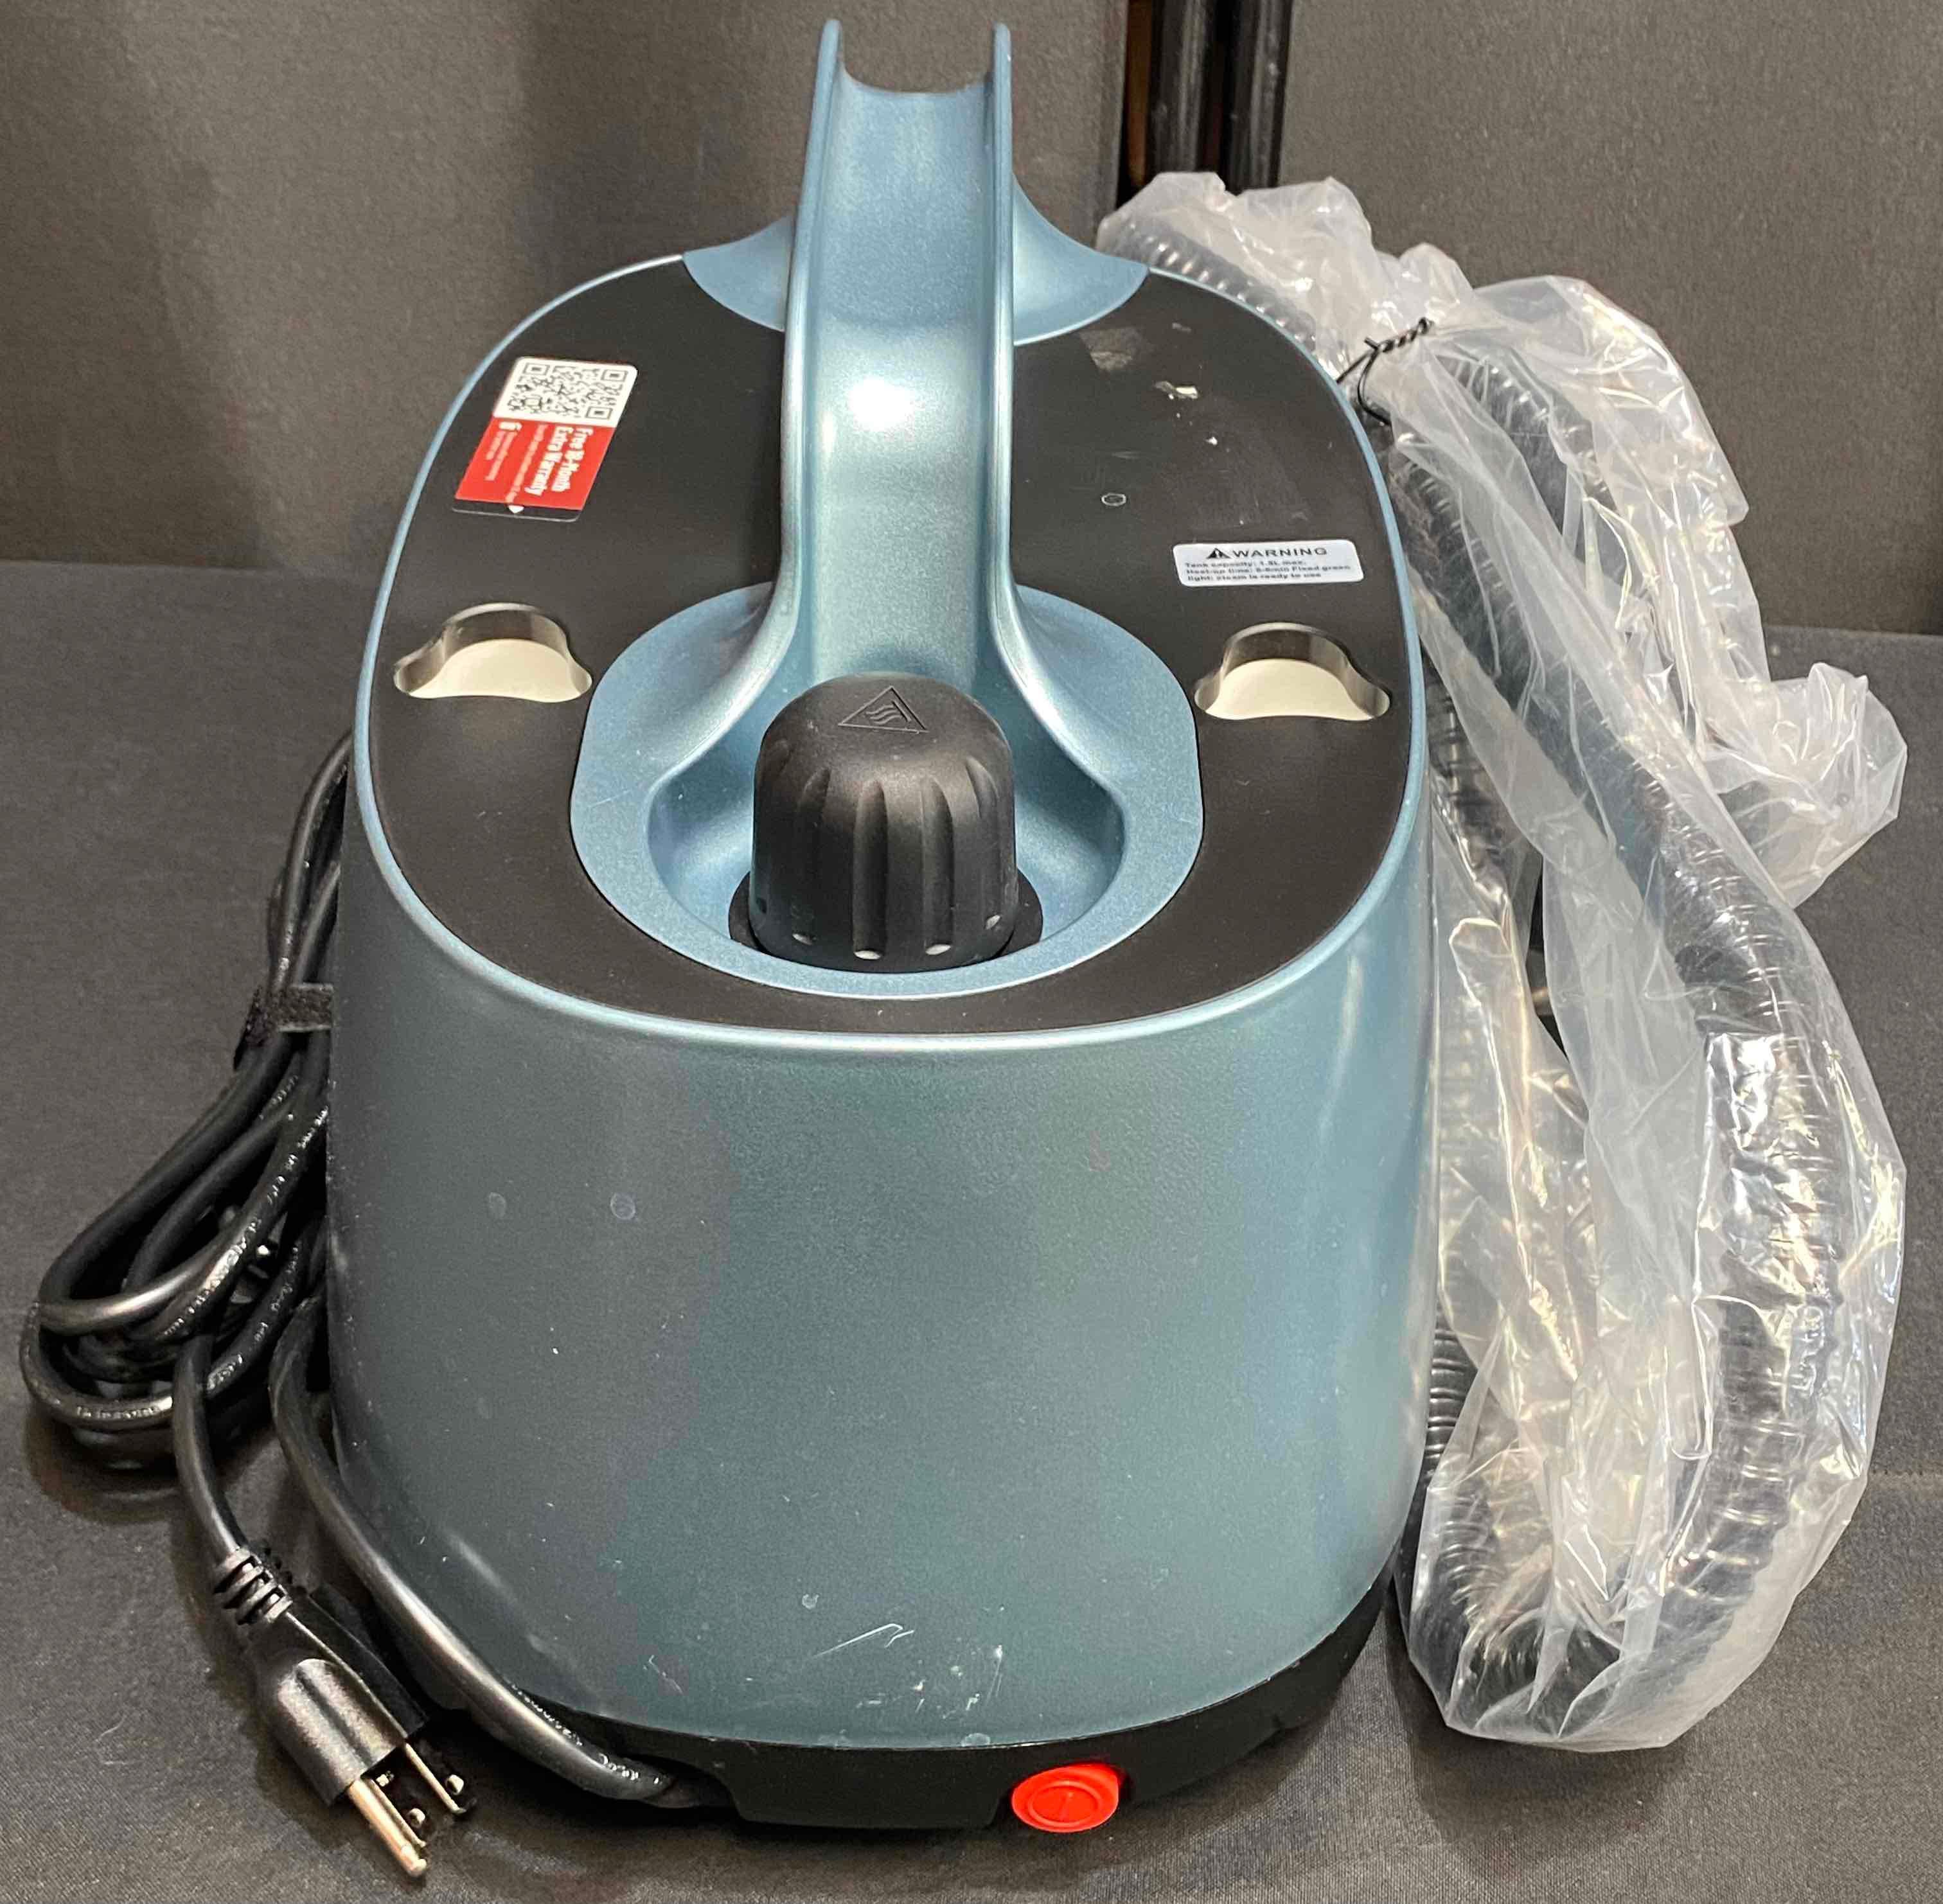 Aspiron Steamer for Cleaning